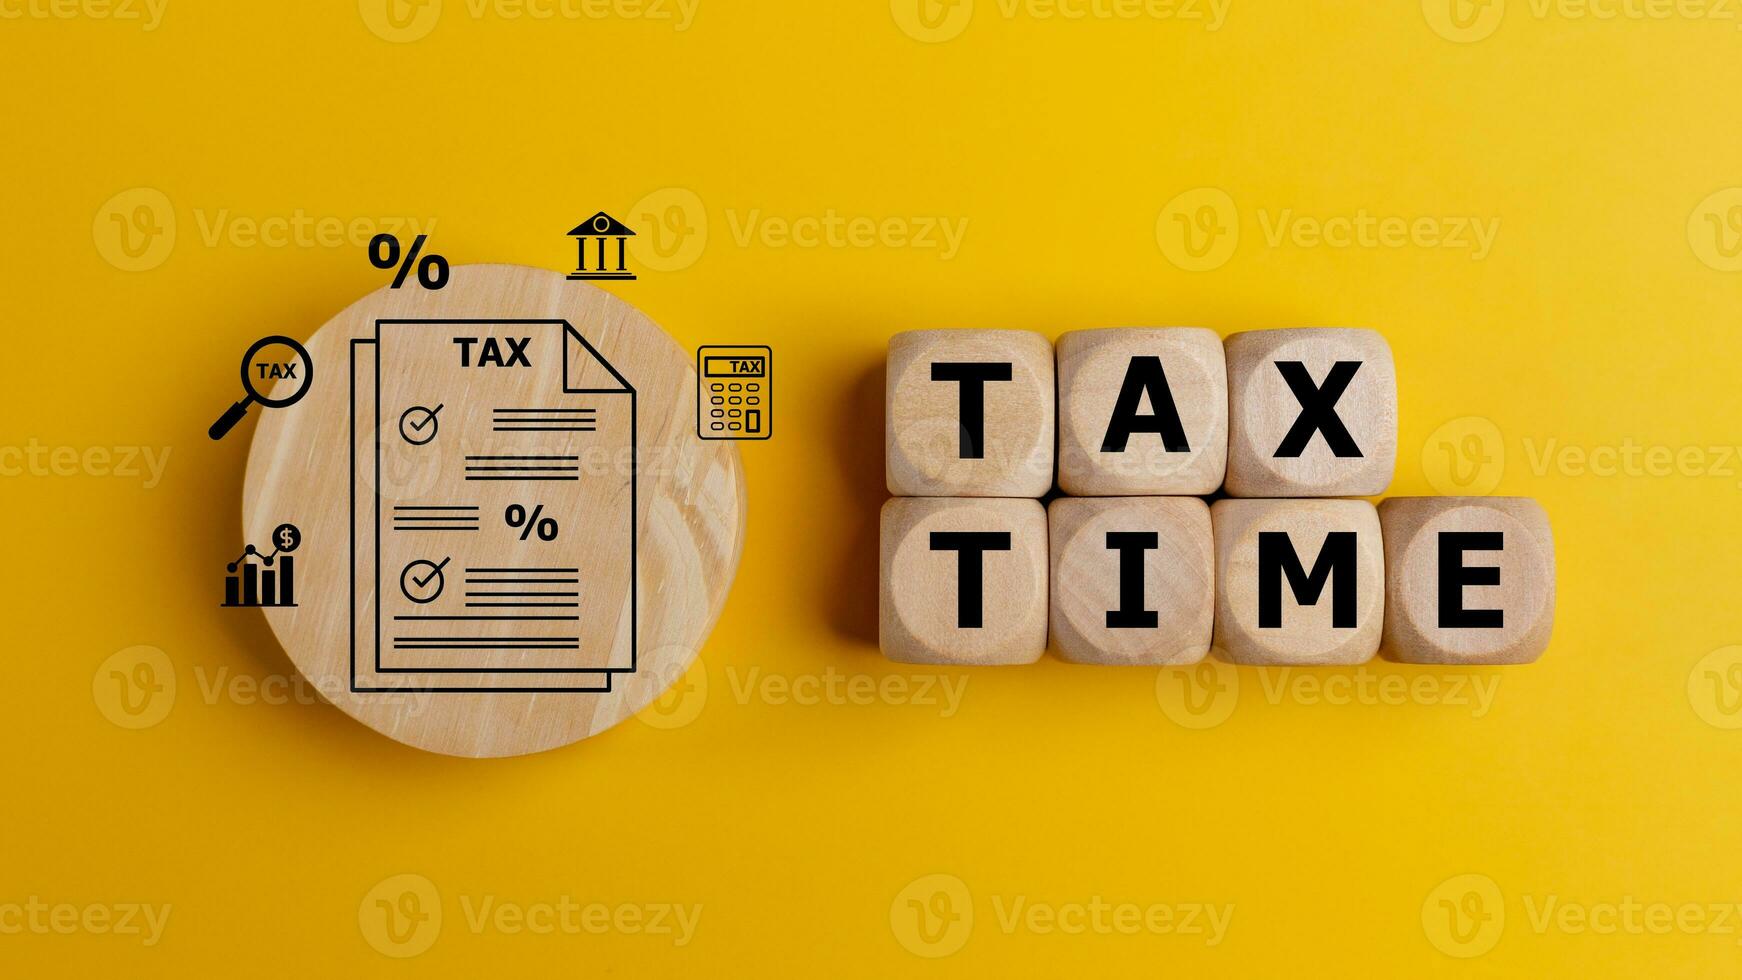 Tax time concept with text on wooden cubes on a yellow background. Tax payment reminder or annual taxation concept. photo